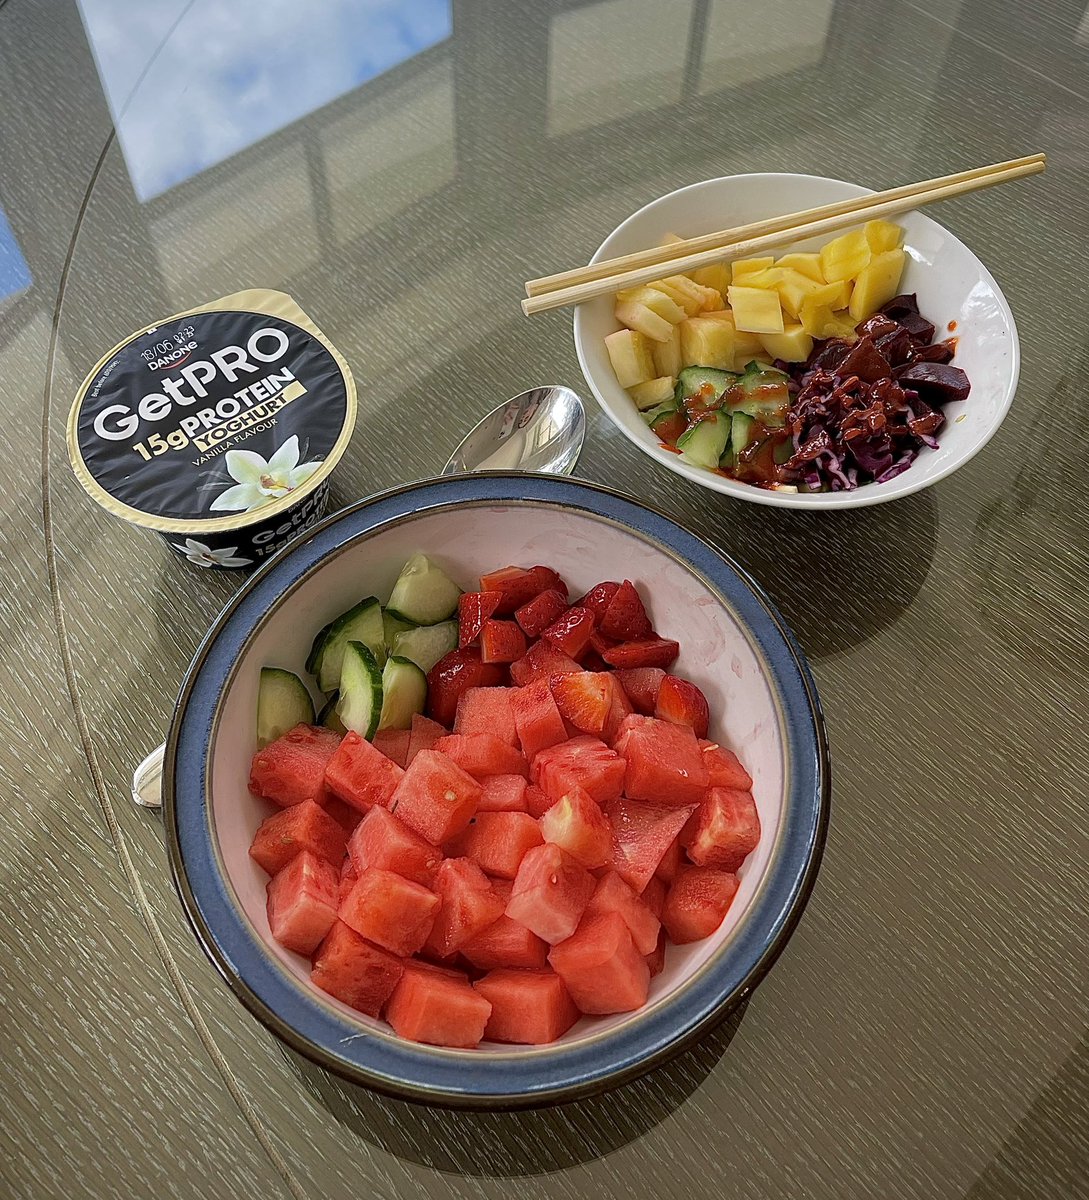 Todays meal 

🍓🥒🍉🍨           🥭🍆🥬🍍 

-1x protein yogurt 
-Watermelon, strawberries and cucumber 
-Poké bowl (zucchini noodles, mango, pineapple, red cabbage, beetroot, cucumber + sriracha)